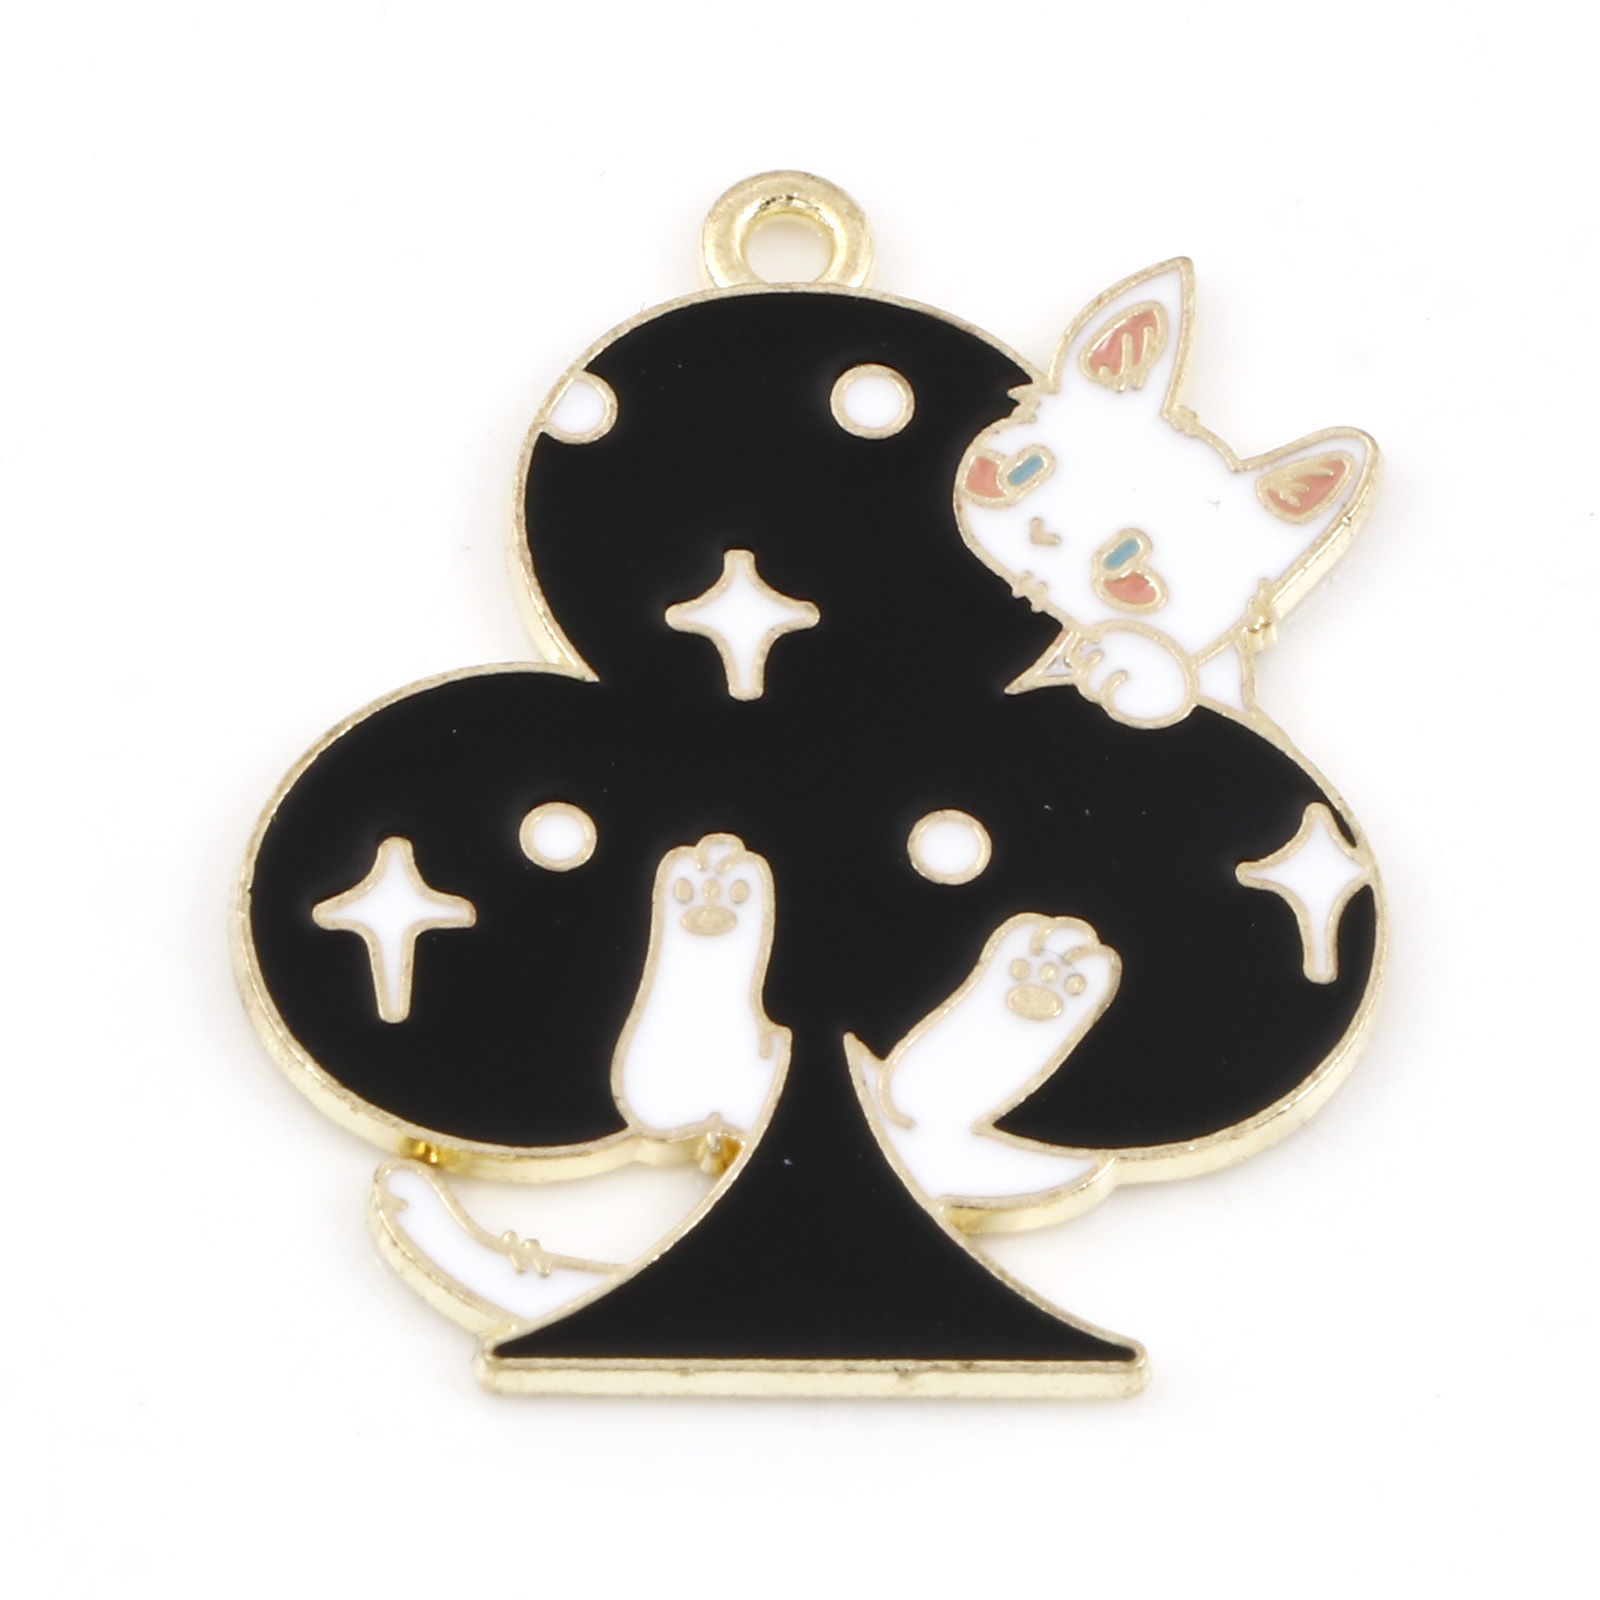 Picture of Zinc Based Alloy Poker/ Paper Card/ Game Card Pendants Gold Plated Black & White Cat Animal Clubs Enamel 3.3cm x 2.8cm, 5 PCs